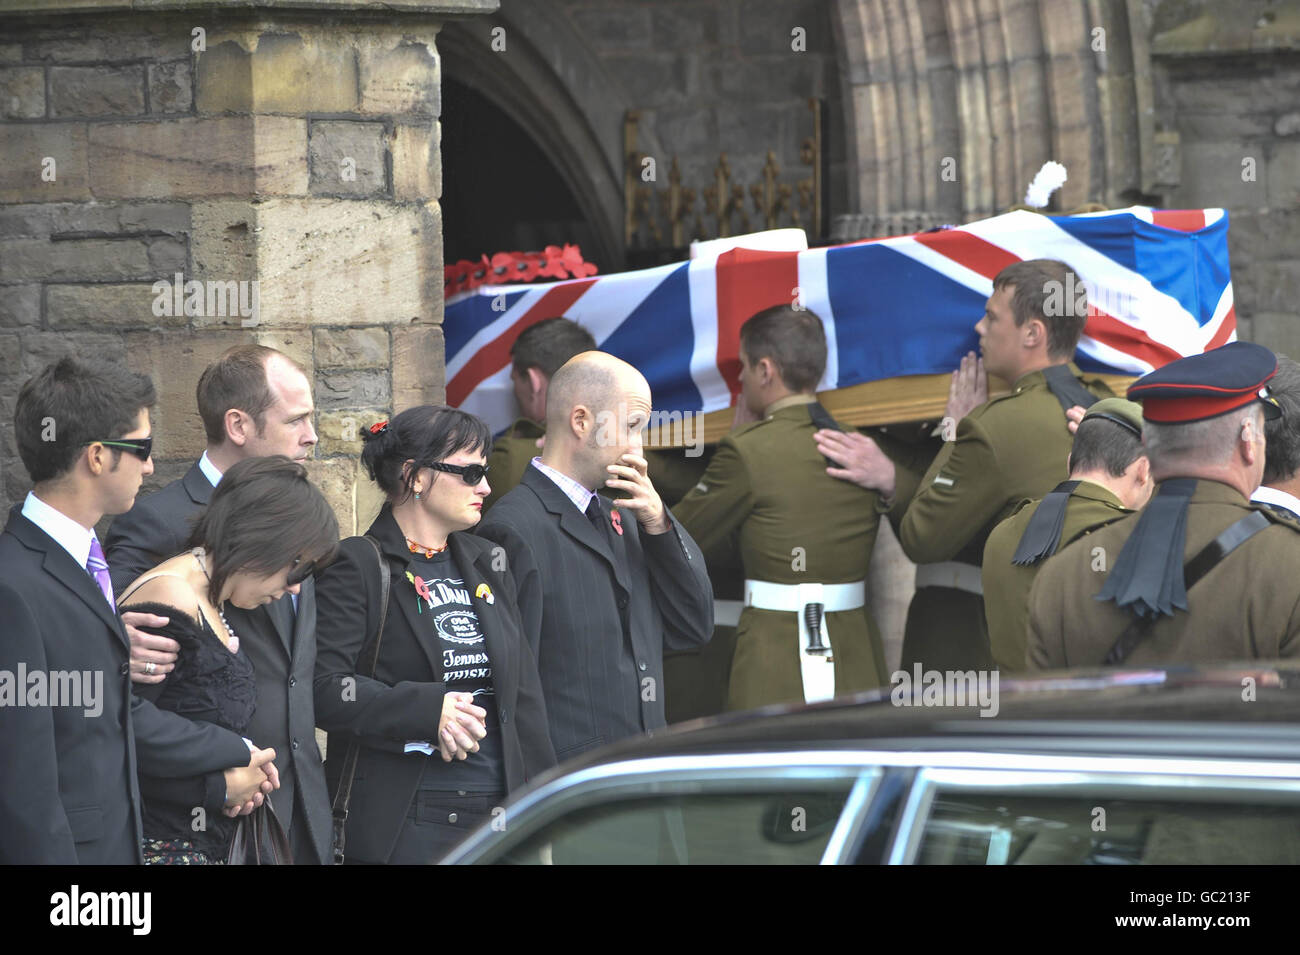 Richard Hunt's family and friends (including Richard's two sisters Fiona, pictured second left, Jayne and Richard's best friend Jonathan Cholakian) watch as Richard's coffin makes its way into Saint Mary's Priory Church, Abergavenny, Wales, where the funeral of Richard is taking place. Stock Photo